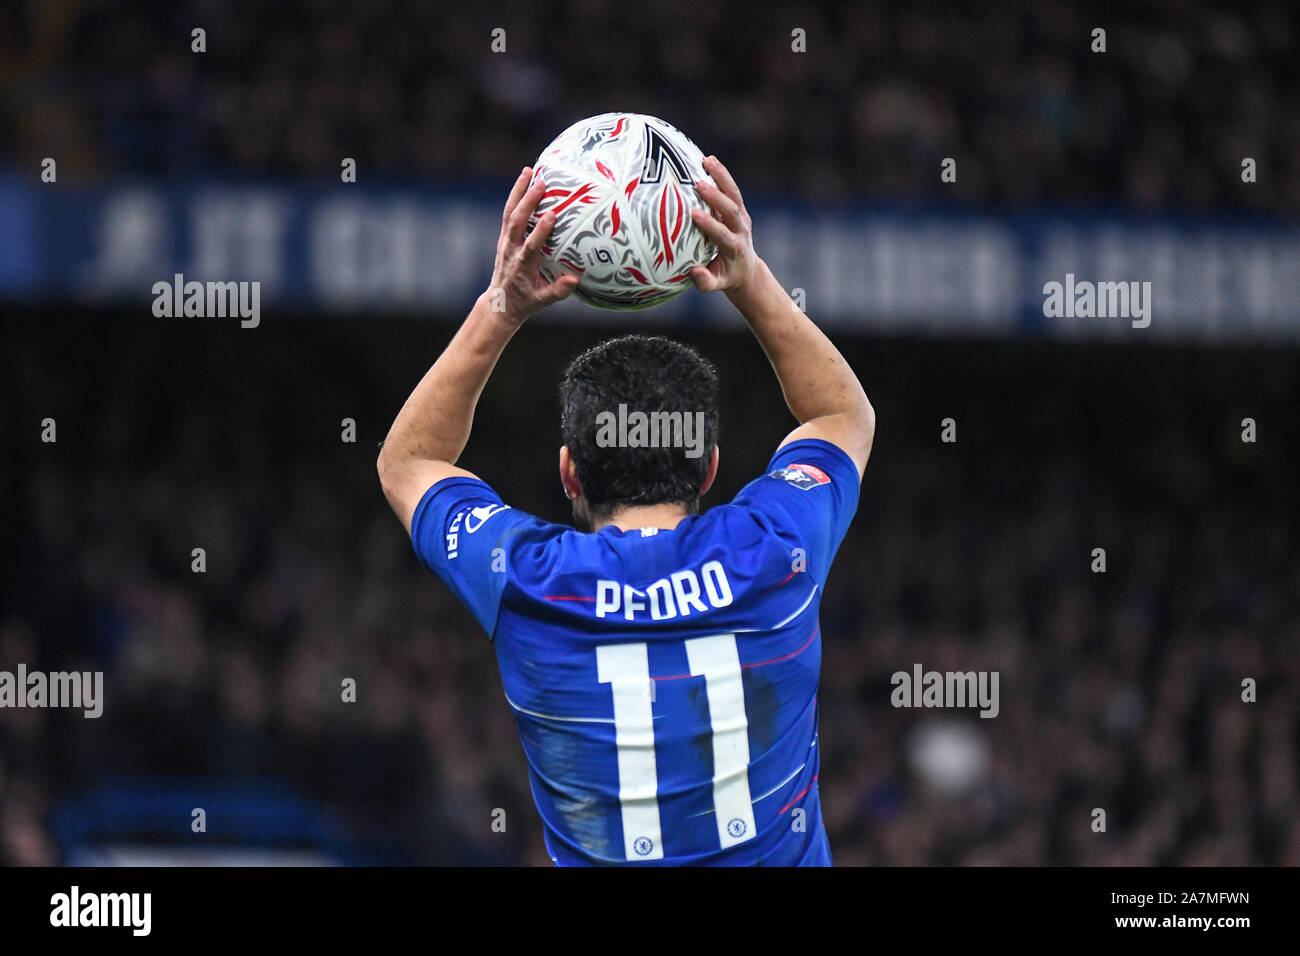 LONDON, ENGLAND - FEBRUARY 18, 2019: Pedro Eliezer Rodriguez Ledesma of Chelsea pictured during the 2018/19 FA Cup Fifth Round game between Chelsea FC and Manchester United at Stamford Bridge. Stock Photo